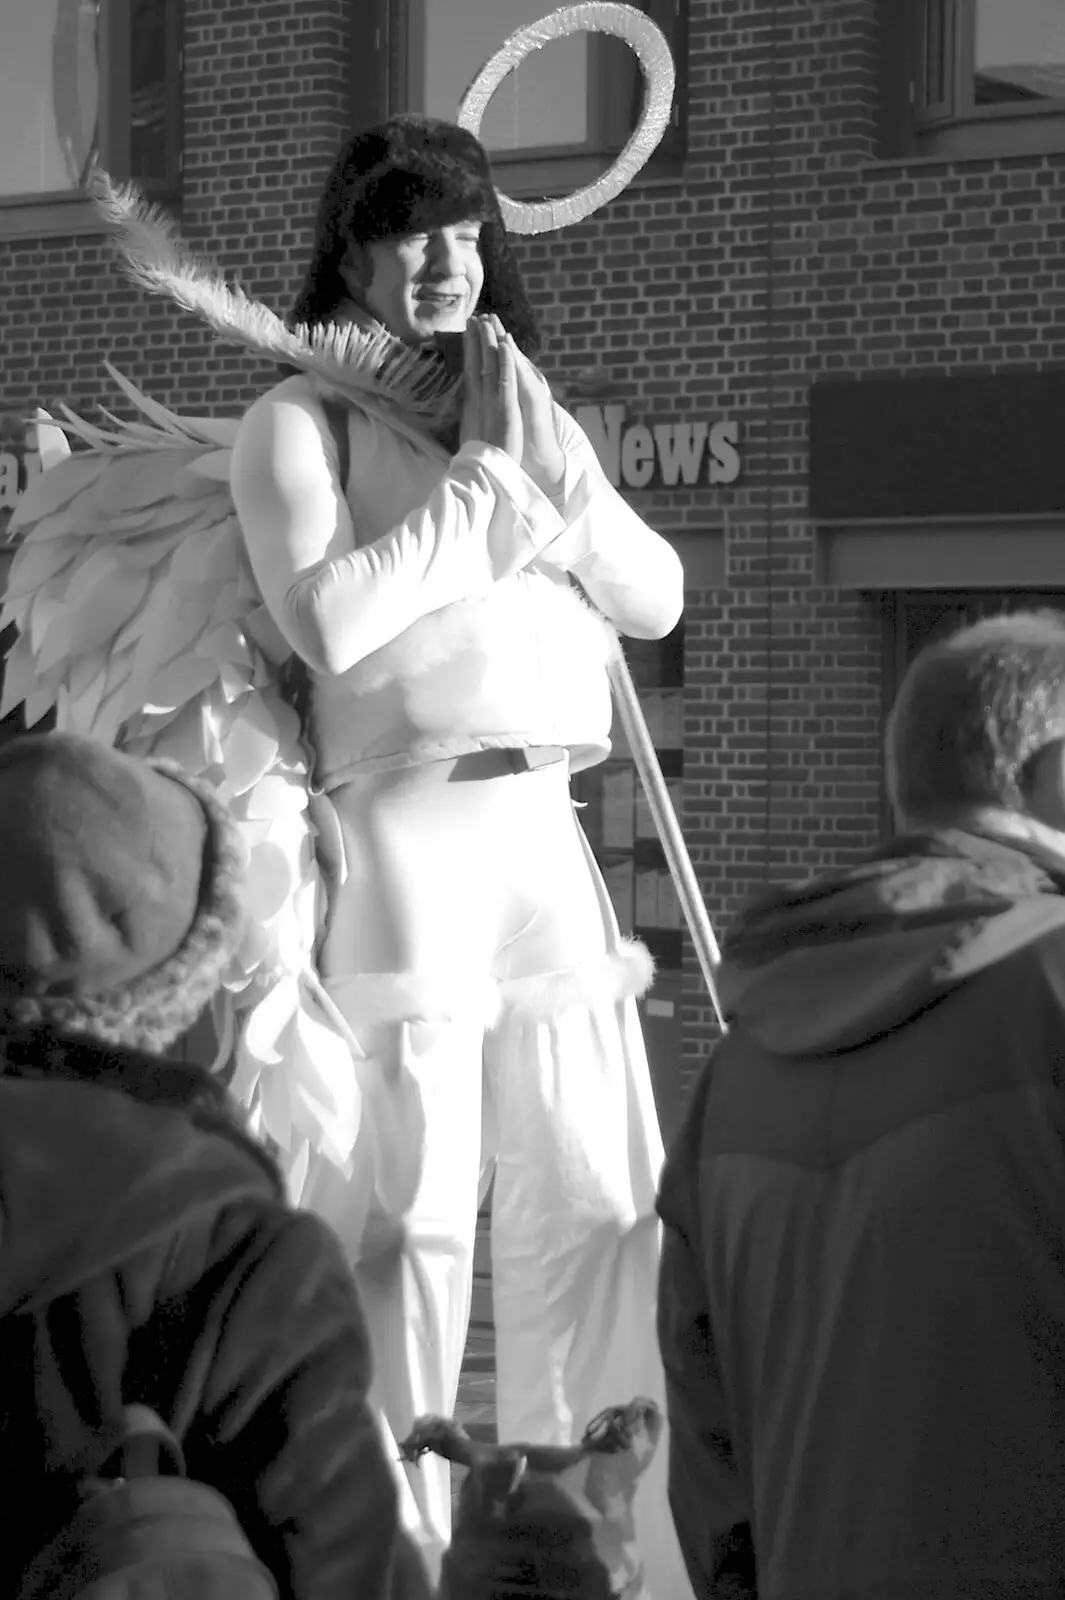 There's an angel on stilts, from Christmas Shopping and a Carol Service, Norwich and Thrandeston - 19th December 2004